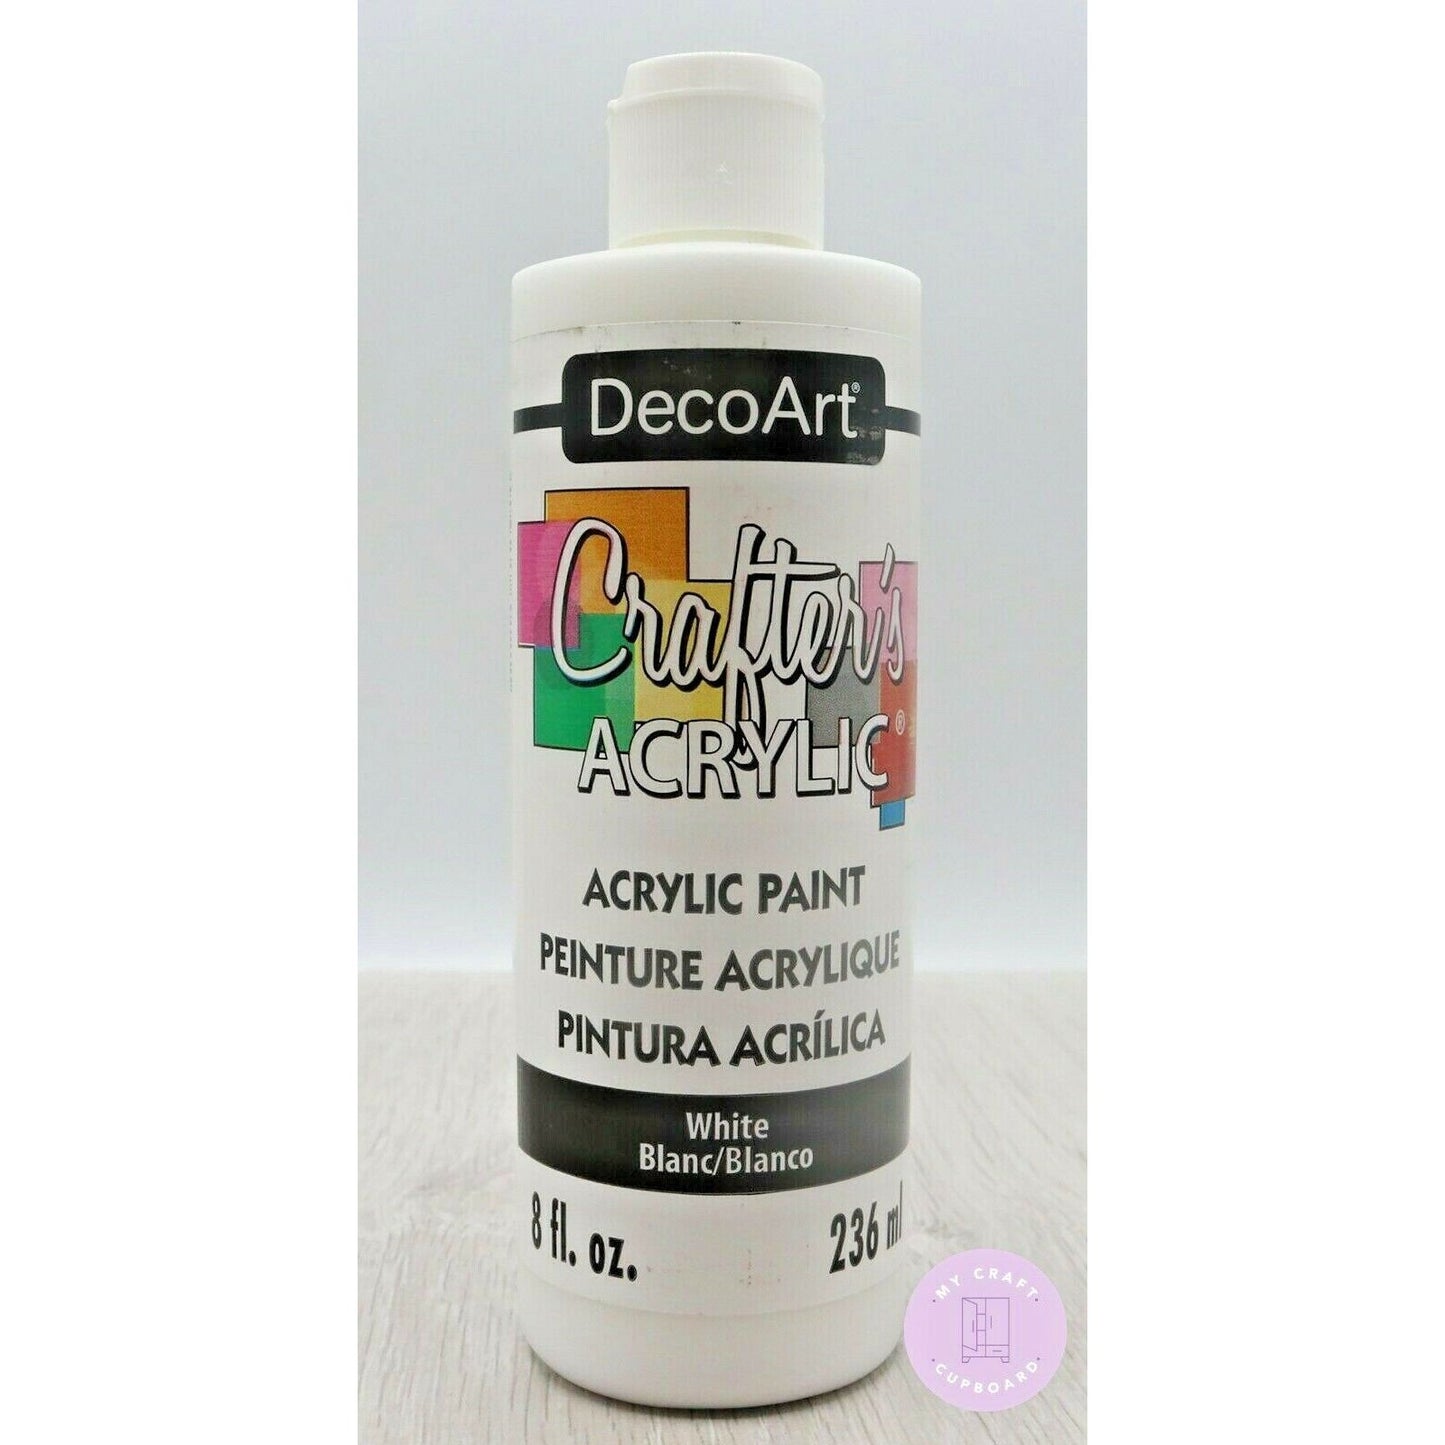 DecoArt Crafters Acrylic White Paint